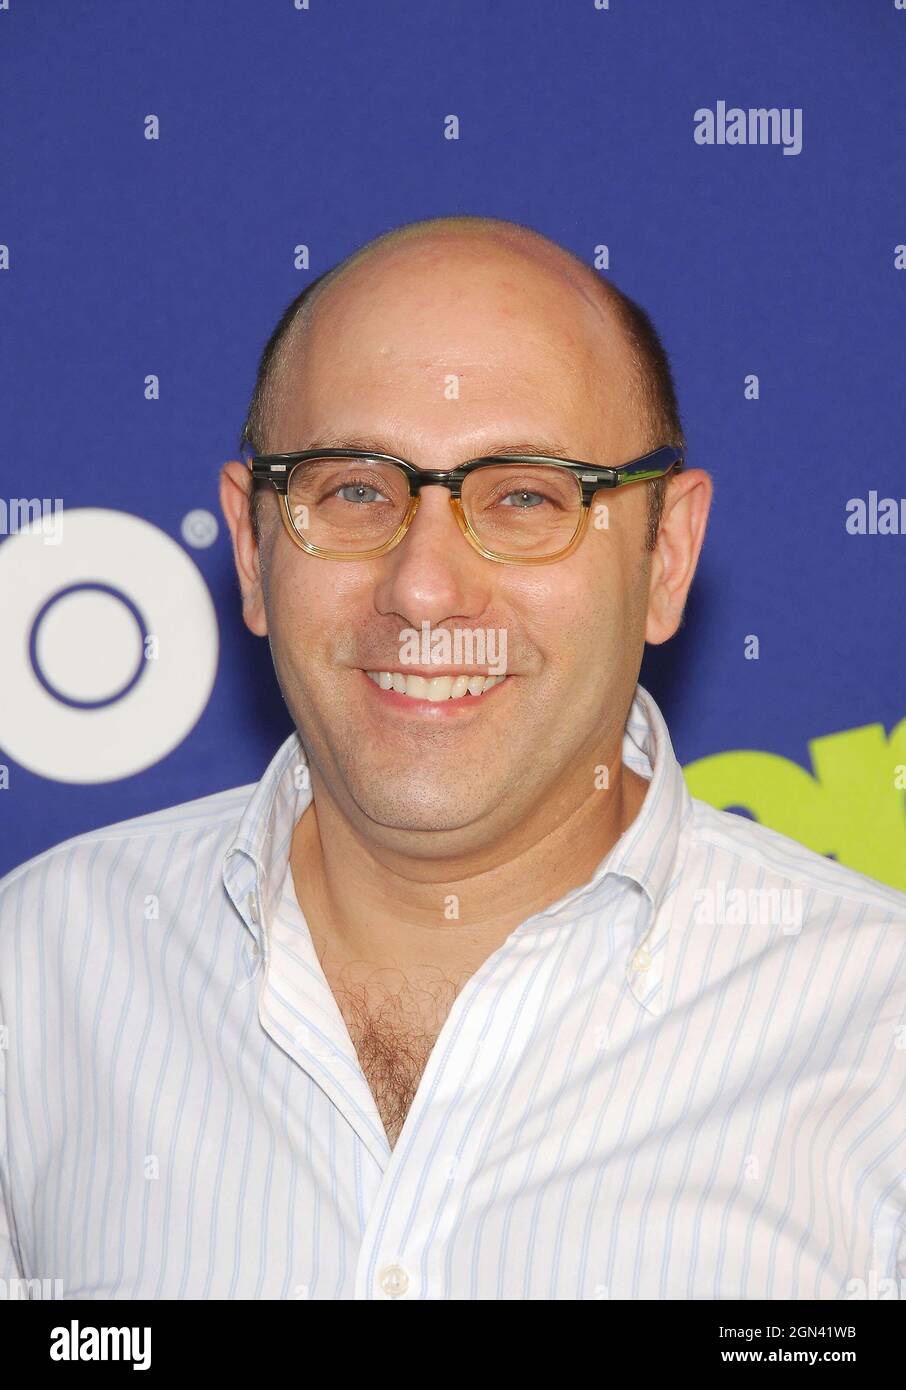 Hollywood, California, USA. 1st June, 2006. Willie Garson. Los Angeles Premiere of the HBO Original Series ENTOURAGE.Photo Credit: Giulio Marcocchi/Sipa Press (') Copyright 2006 by Giulio Marcocchi./entourageLA.013/Color Space SRGB/0606021118 Credit: Sipa USA/Alamy Live News Stock Photo